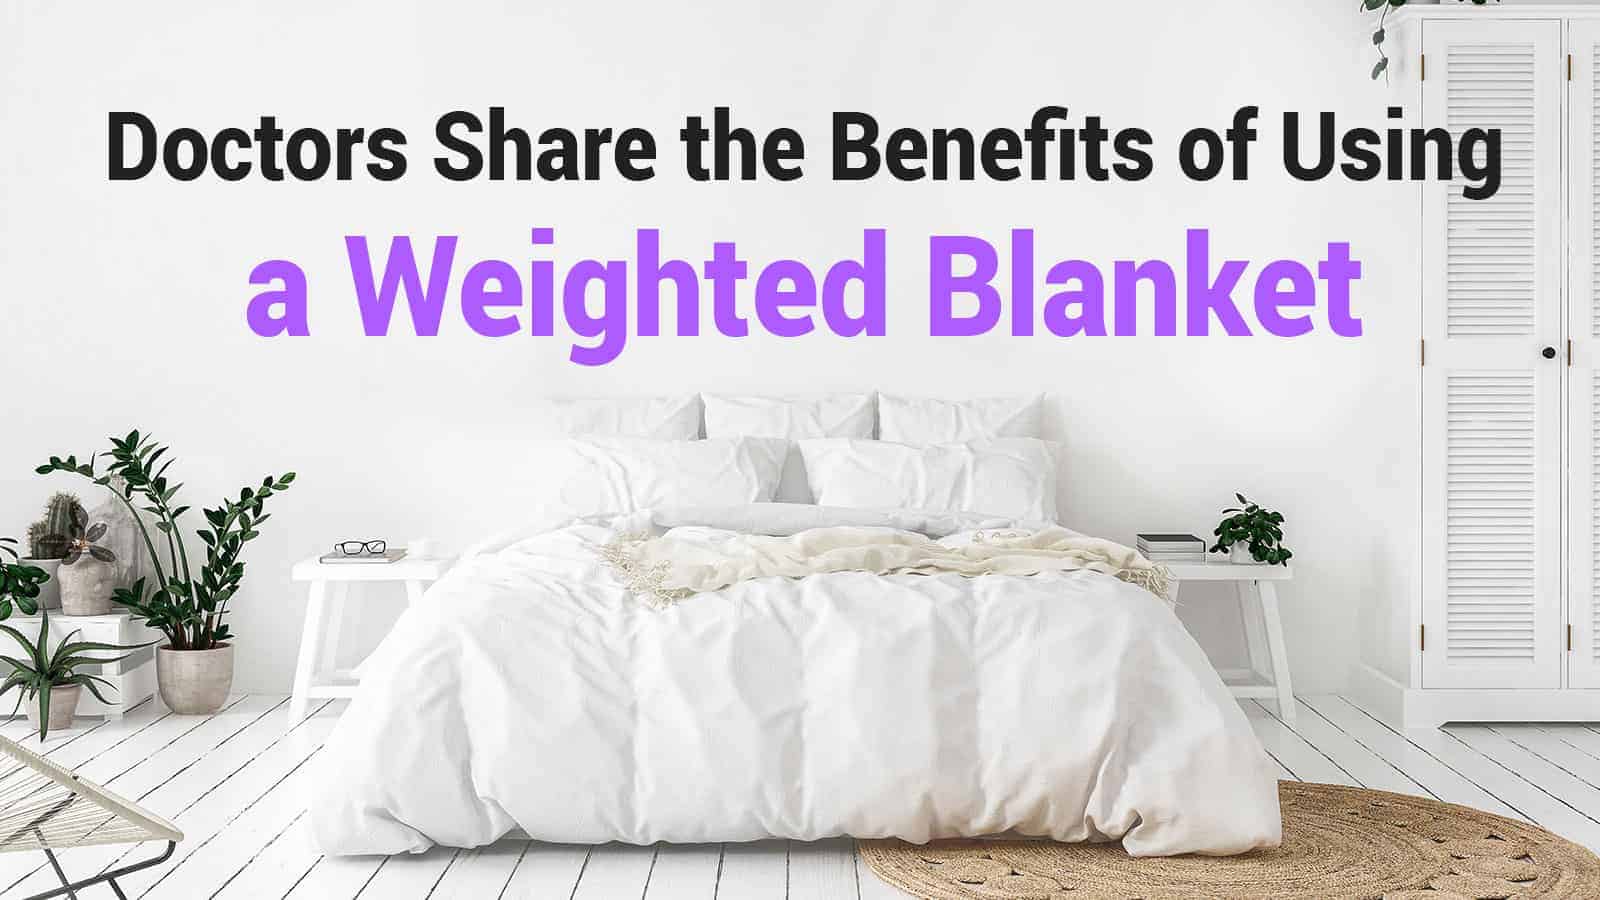 Doctors Share the Benefits of Using a Weighted Blanket